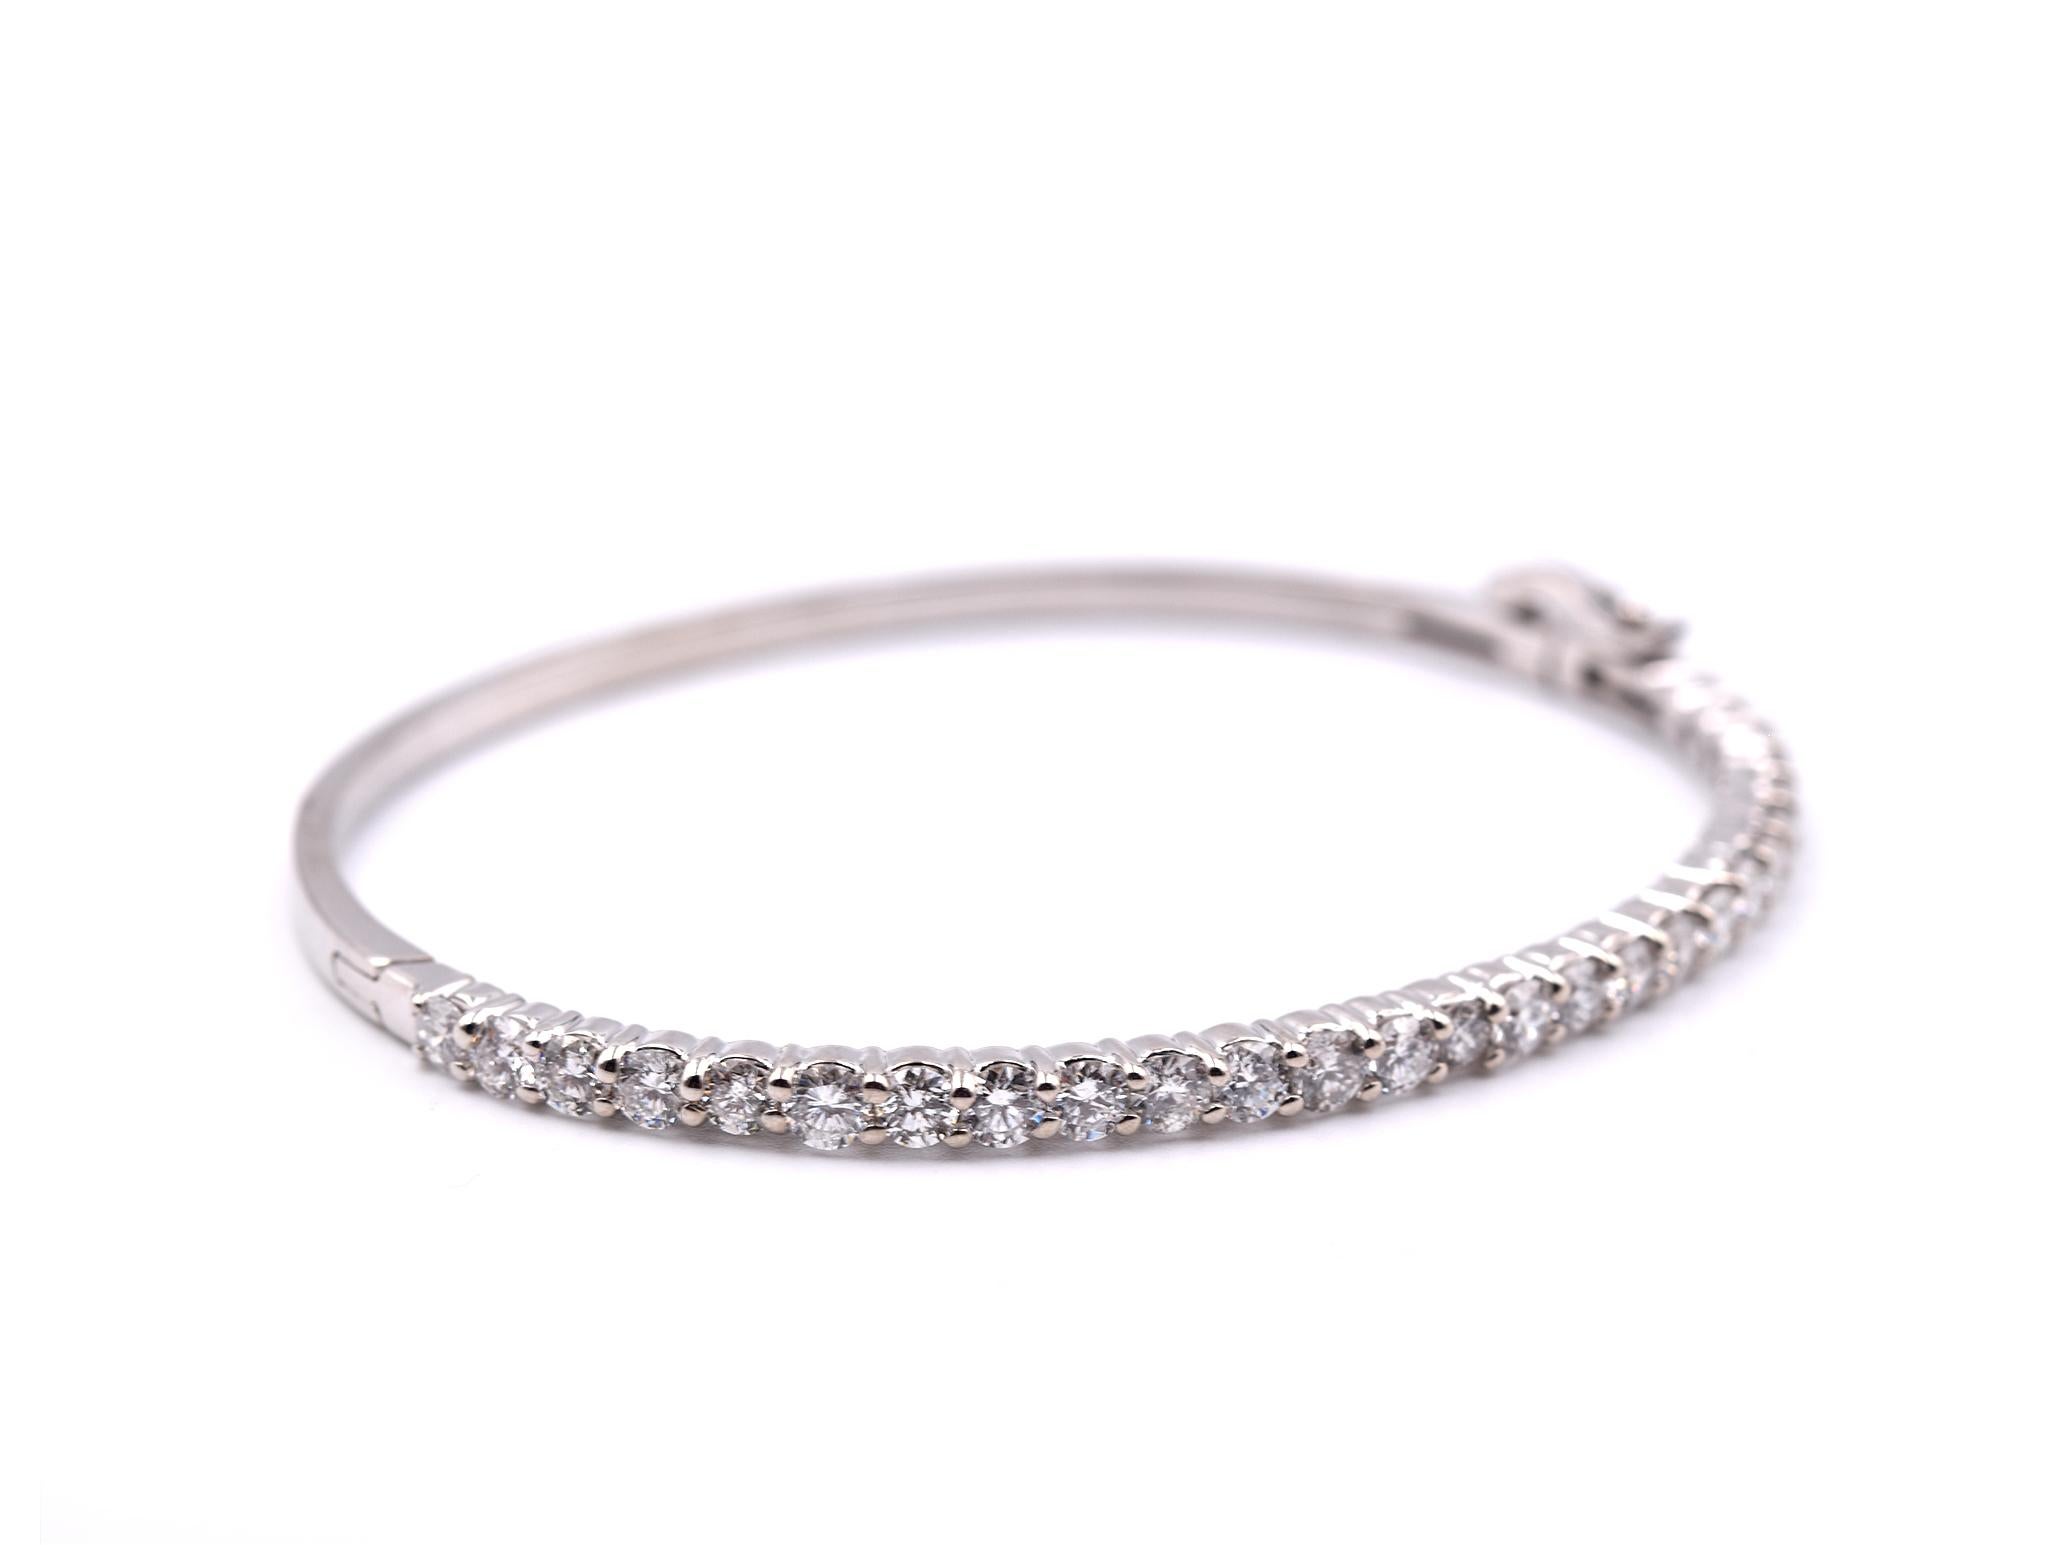 Designer: custom designed
Material: 14k white gold
Diamonds: 27 round brilliant cut= 2.66cttw
Color: G
Clarity: VS
Dimensions: bracelet will fit a 6 ½ inch wrist and it is approximately 3.12mm wide
Weight: 11.08 grams
